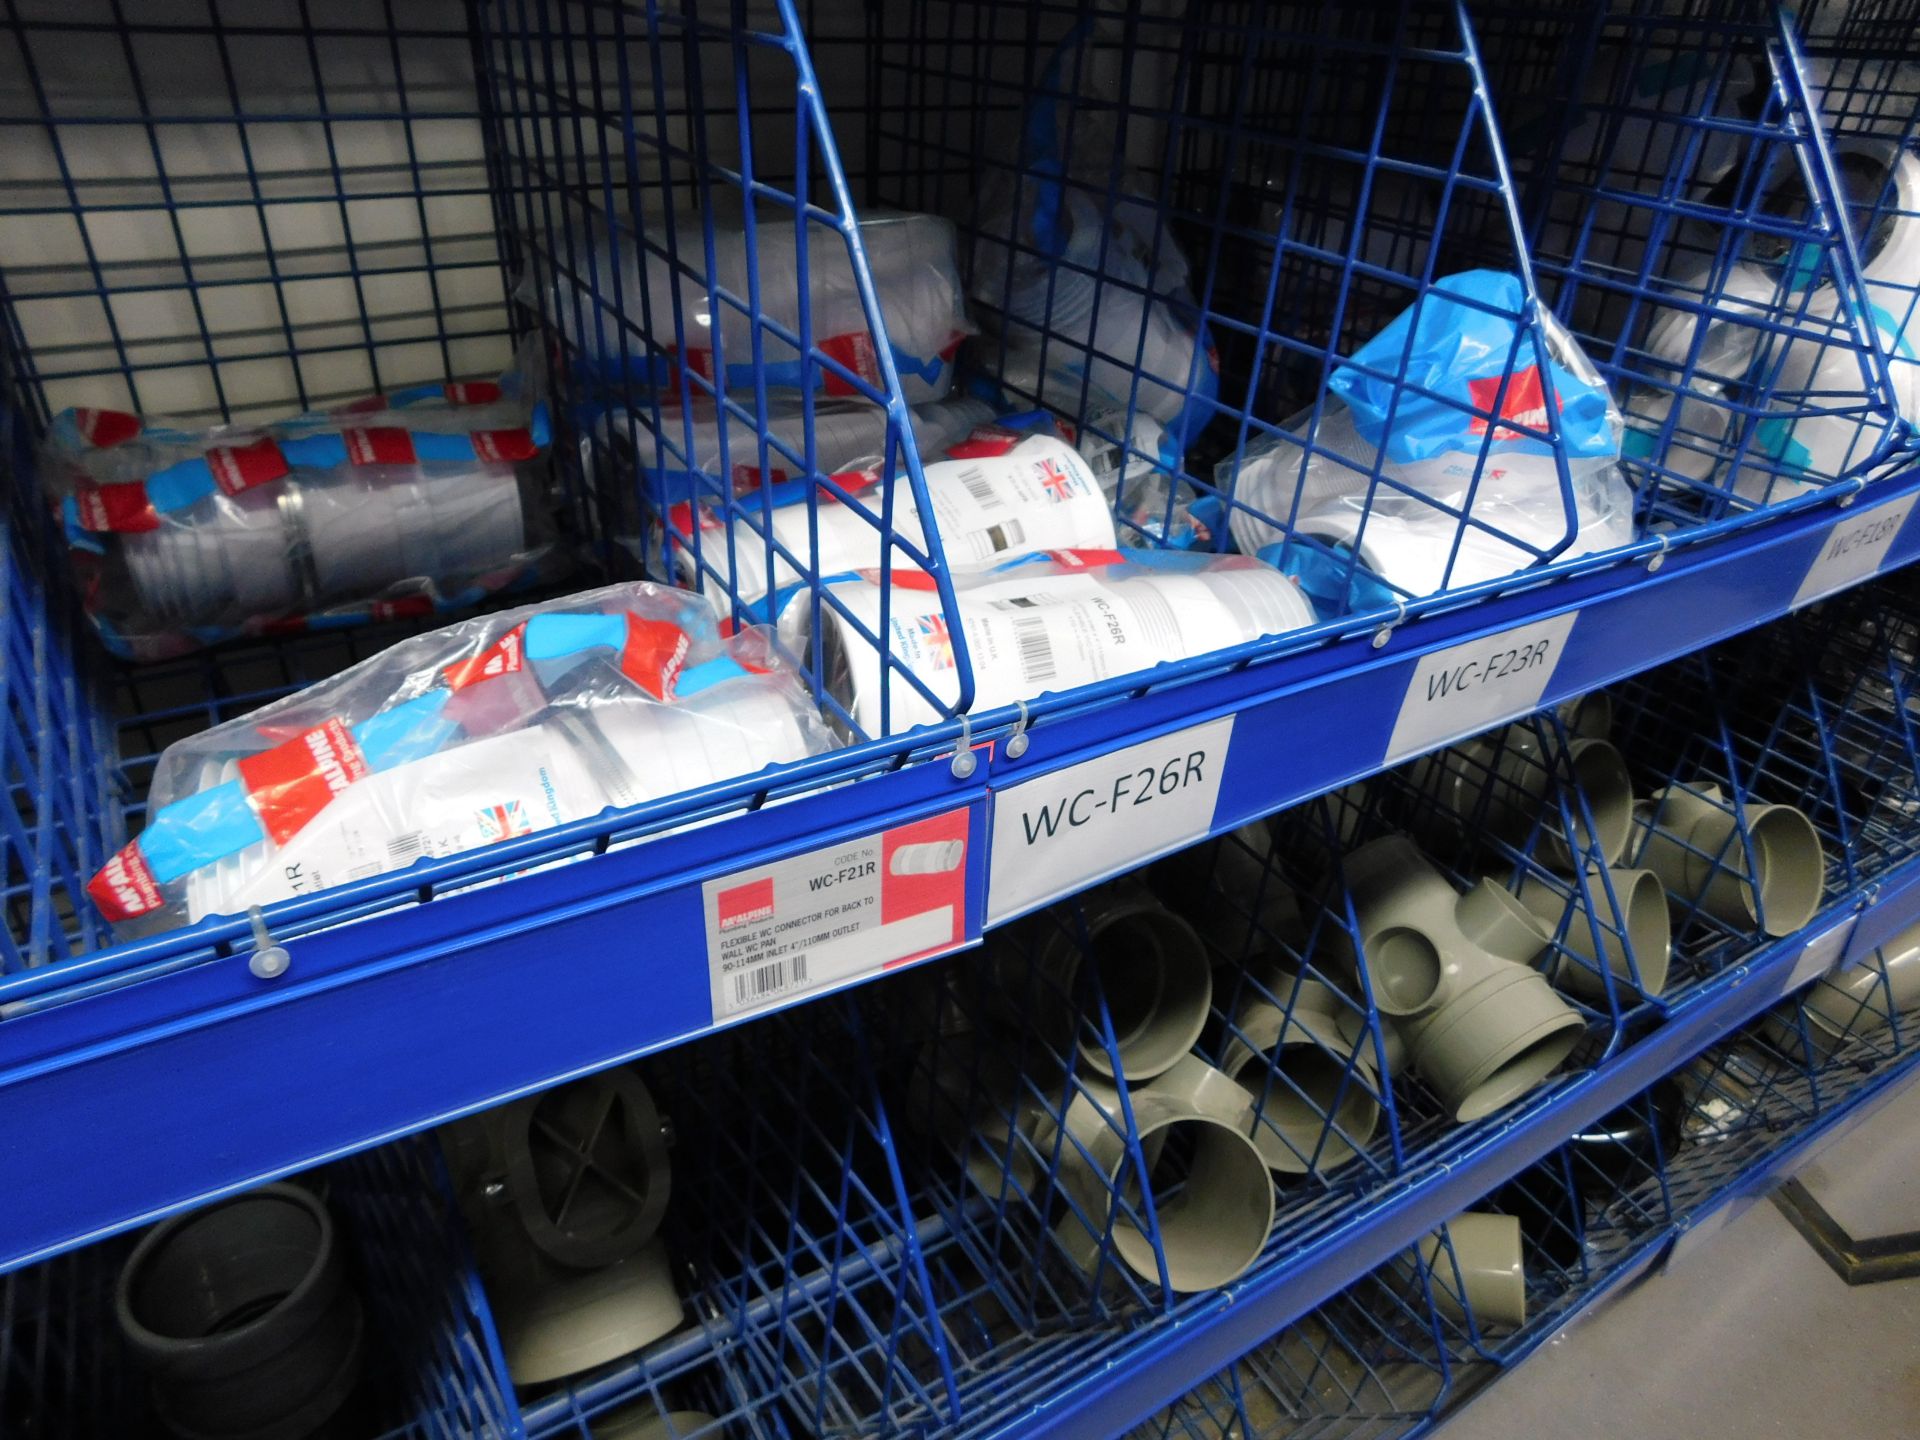 20 Plastic Coated Baskets & Contents including Adjustable Connectors, Soil Pipe Connectors etc. ( - Image 3 of 5